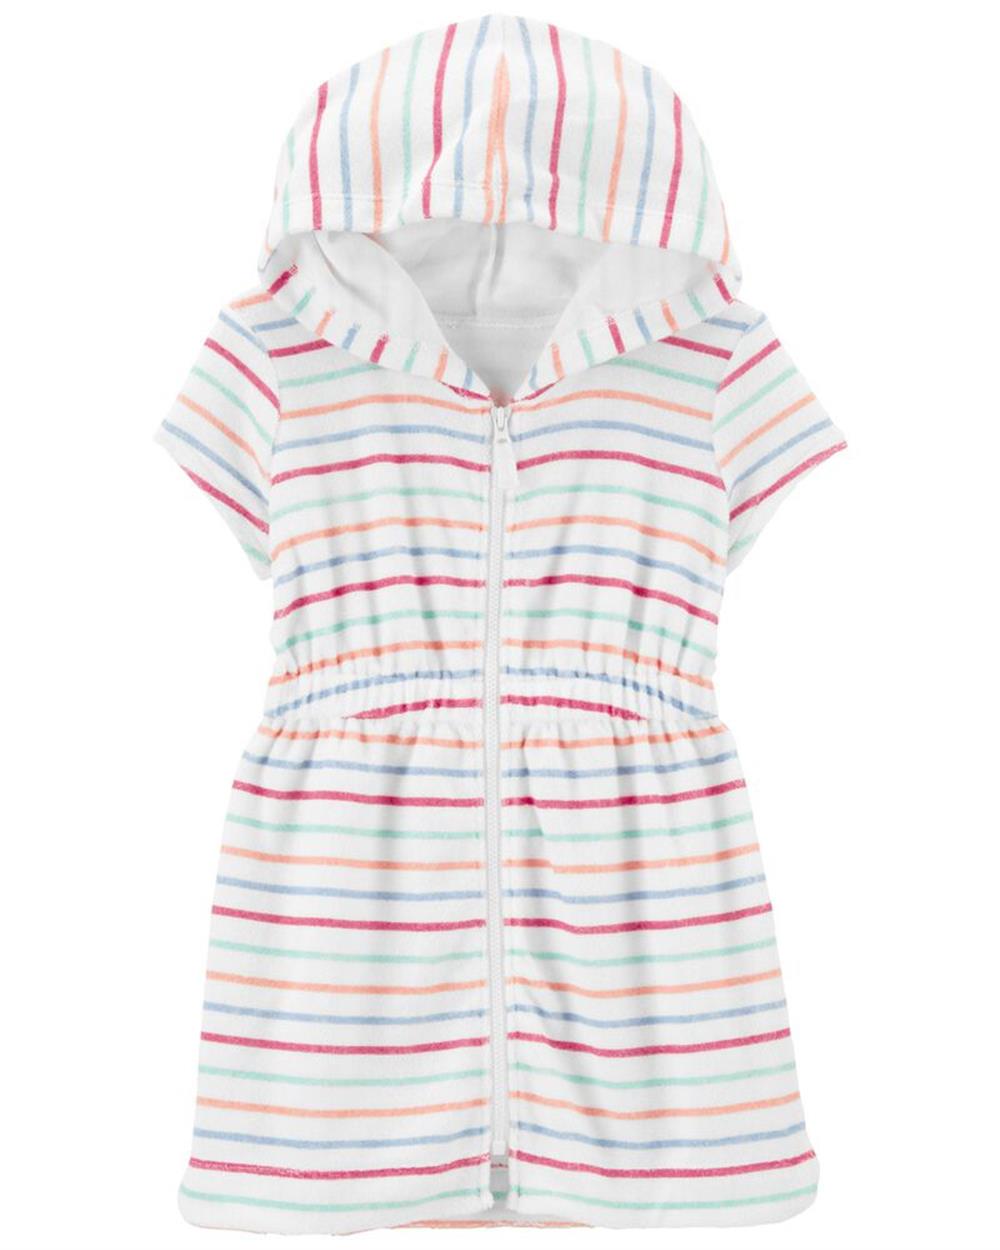 Carters Girls 4-14 Striped Hooded Cover-up